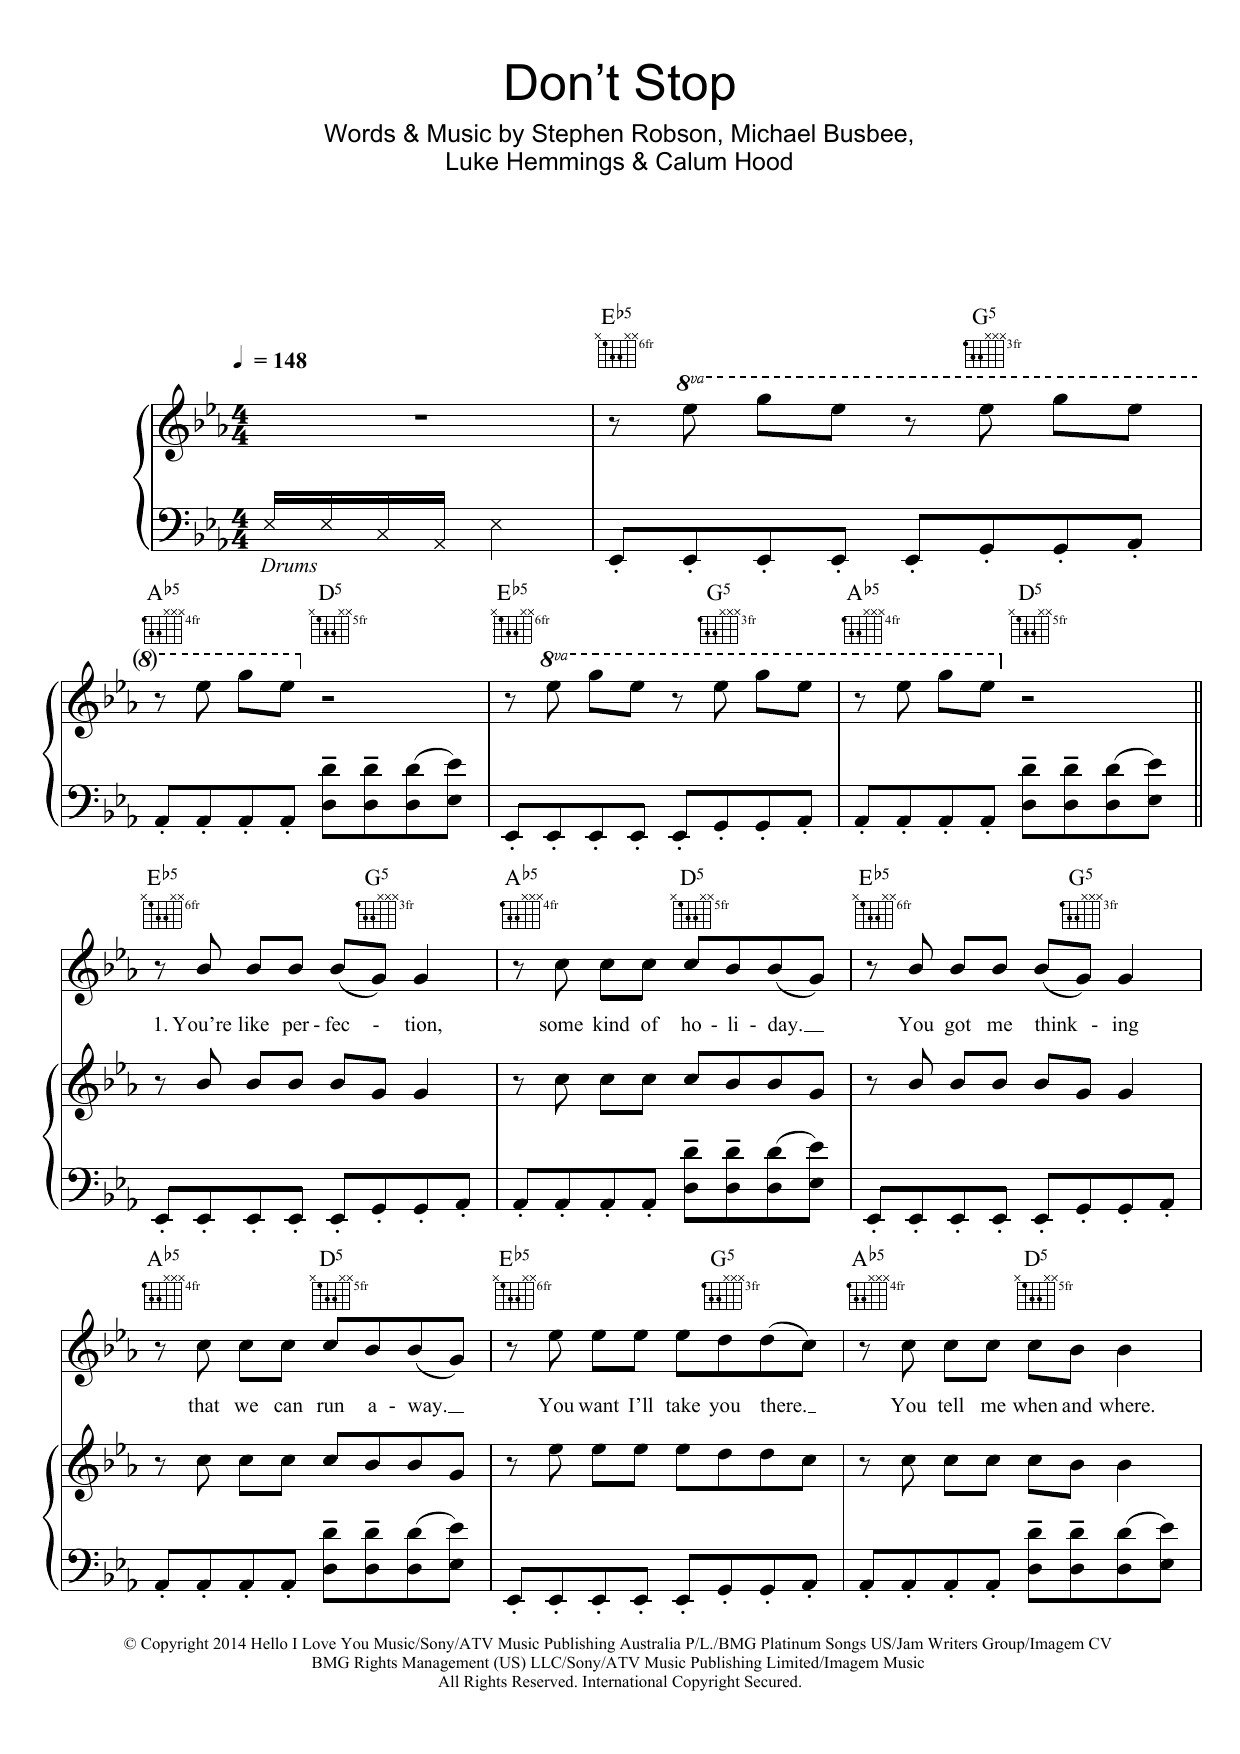 Download 5 Seconds of Summer Don't Stop Sheet Music and Printable PDF Score for Piano Chords/Lyrics